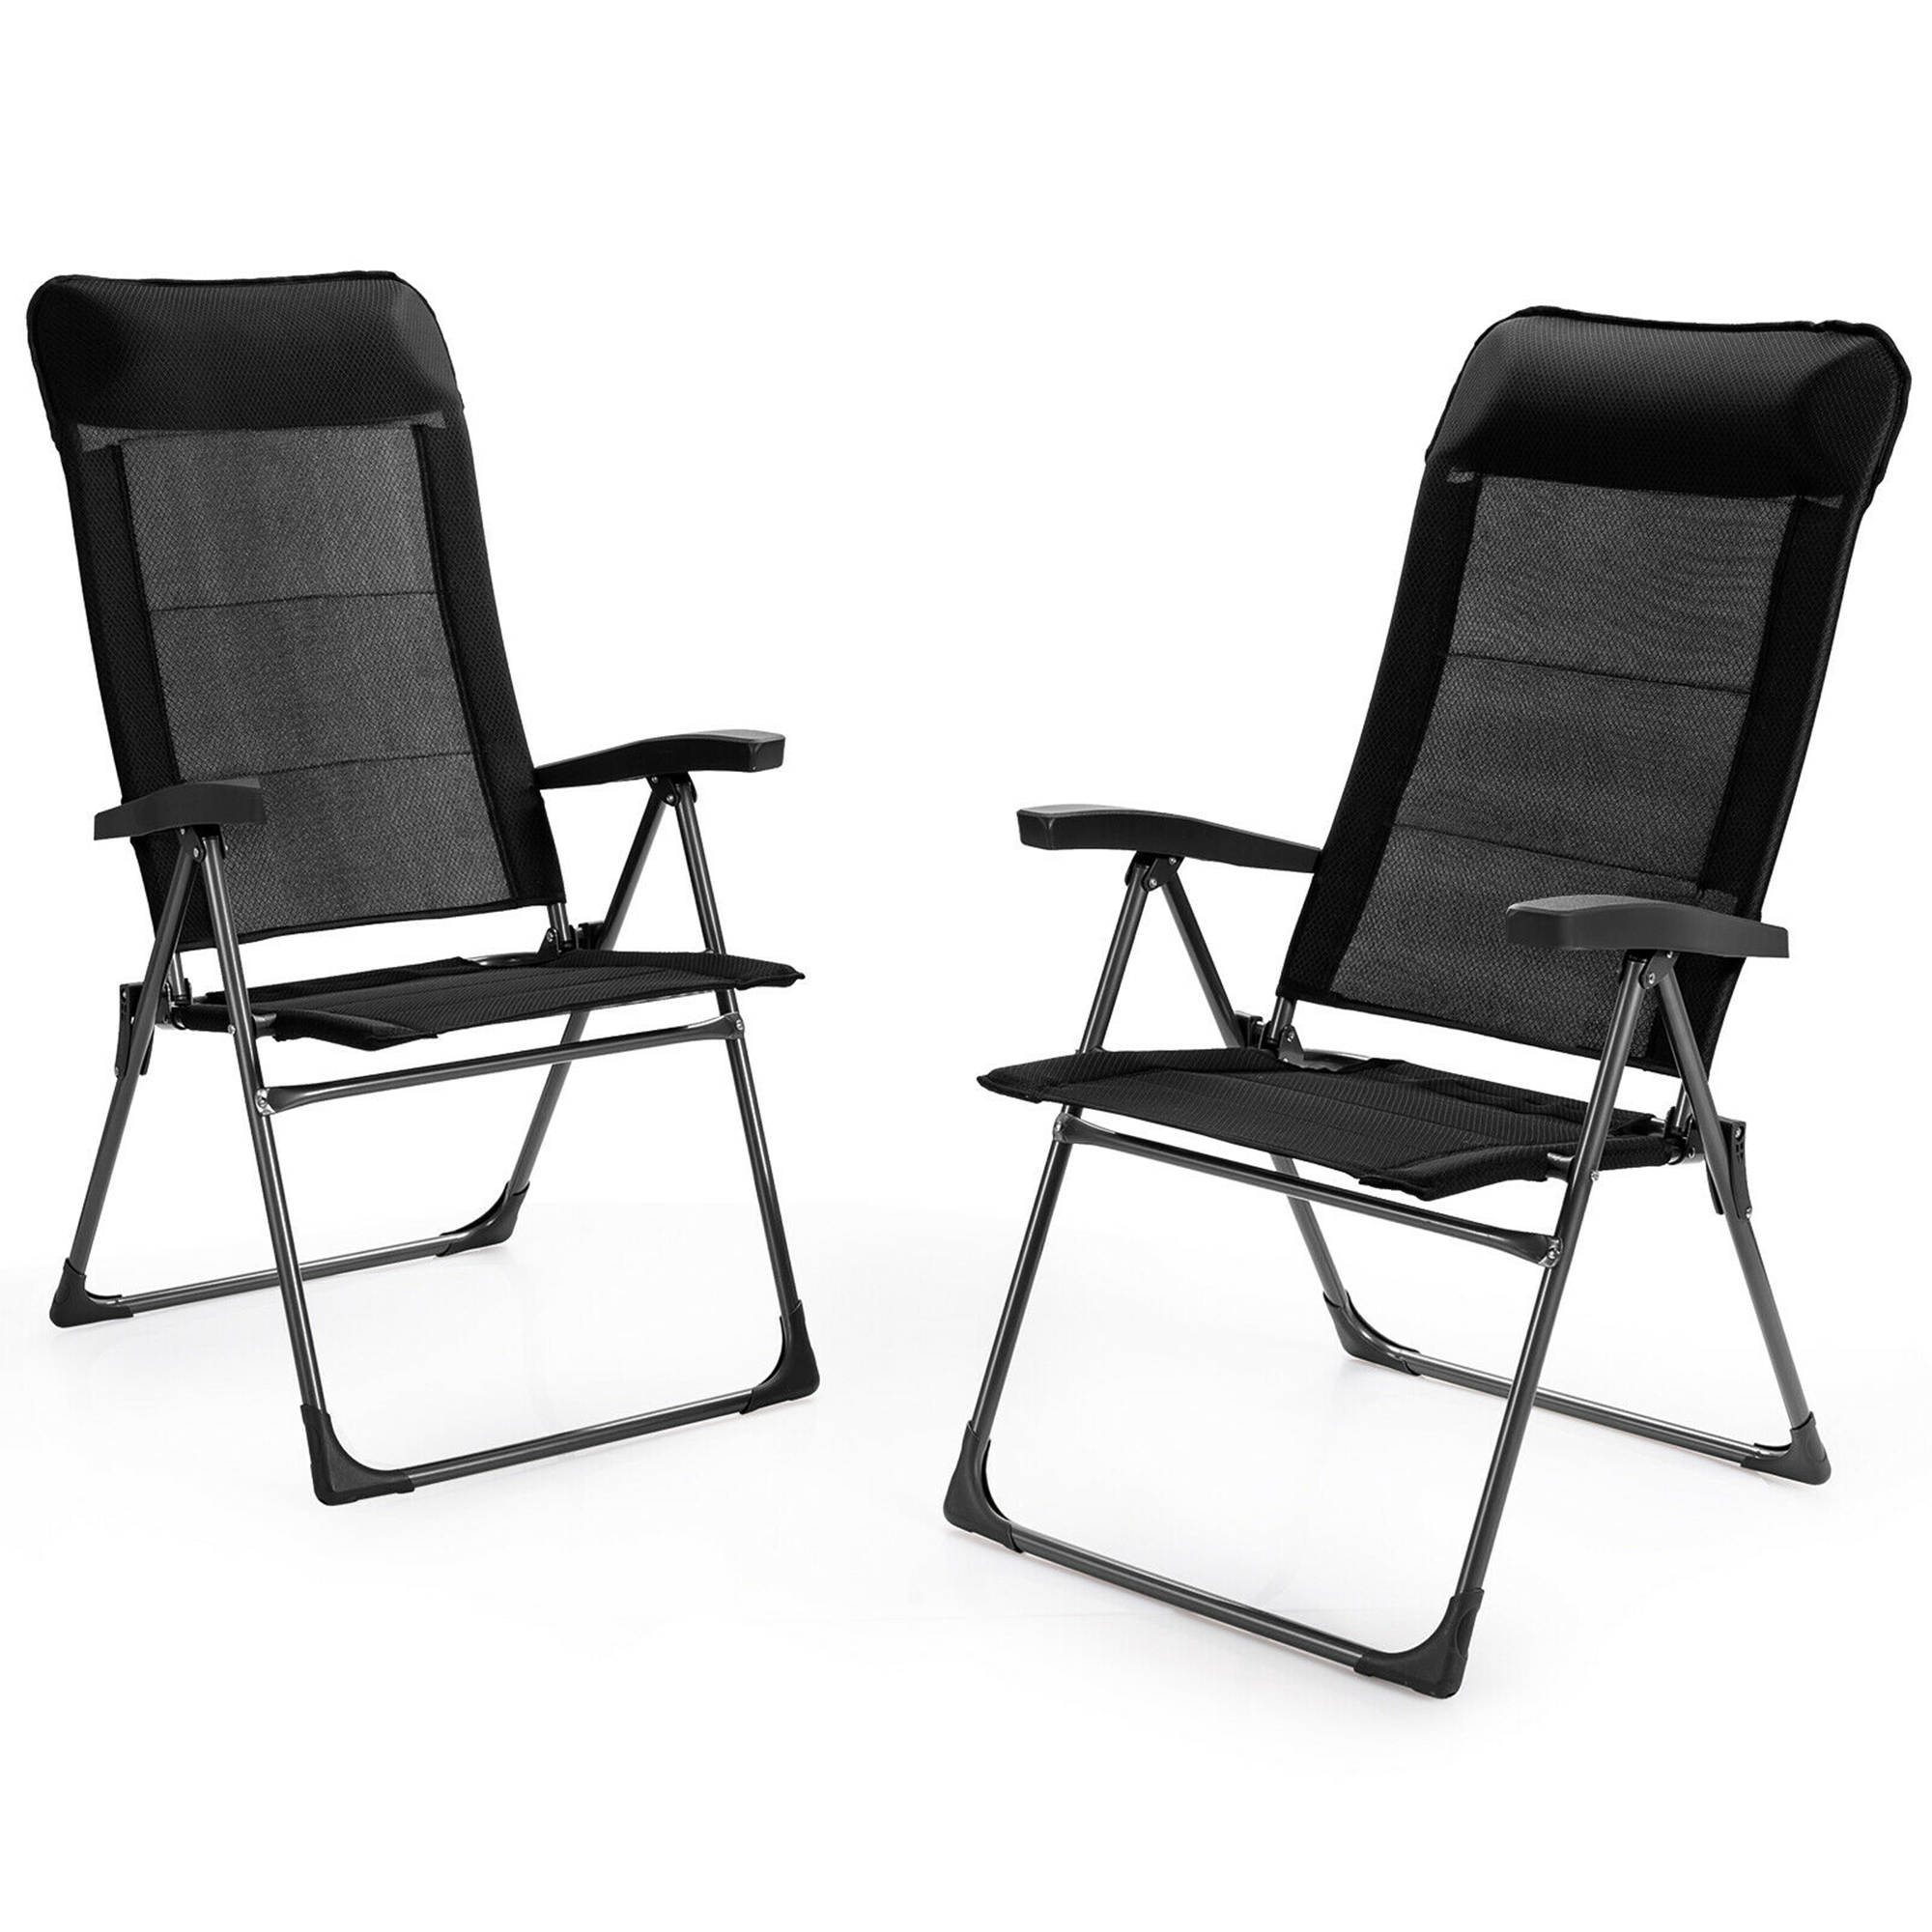 Gymax 2PCS Patio Folding Dining Chairs Portable Camping Headrest Adjust Black - image 1 of 10